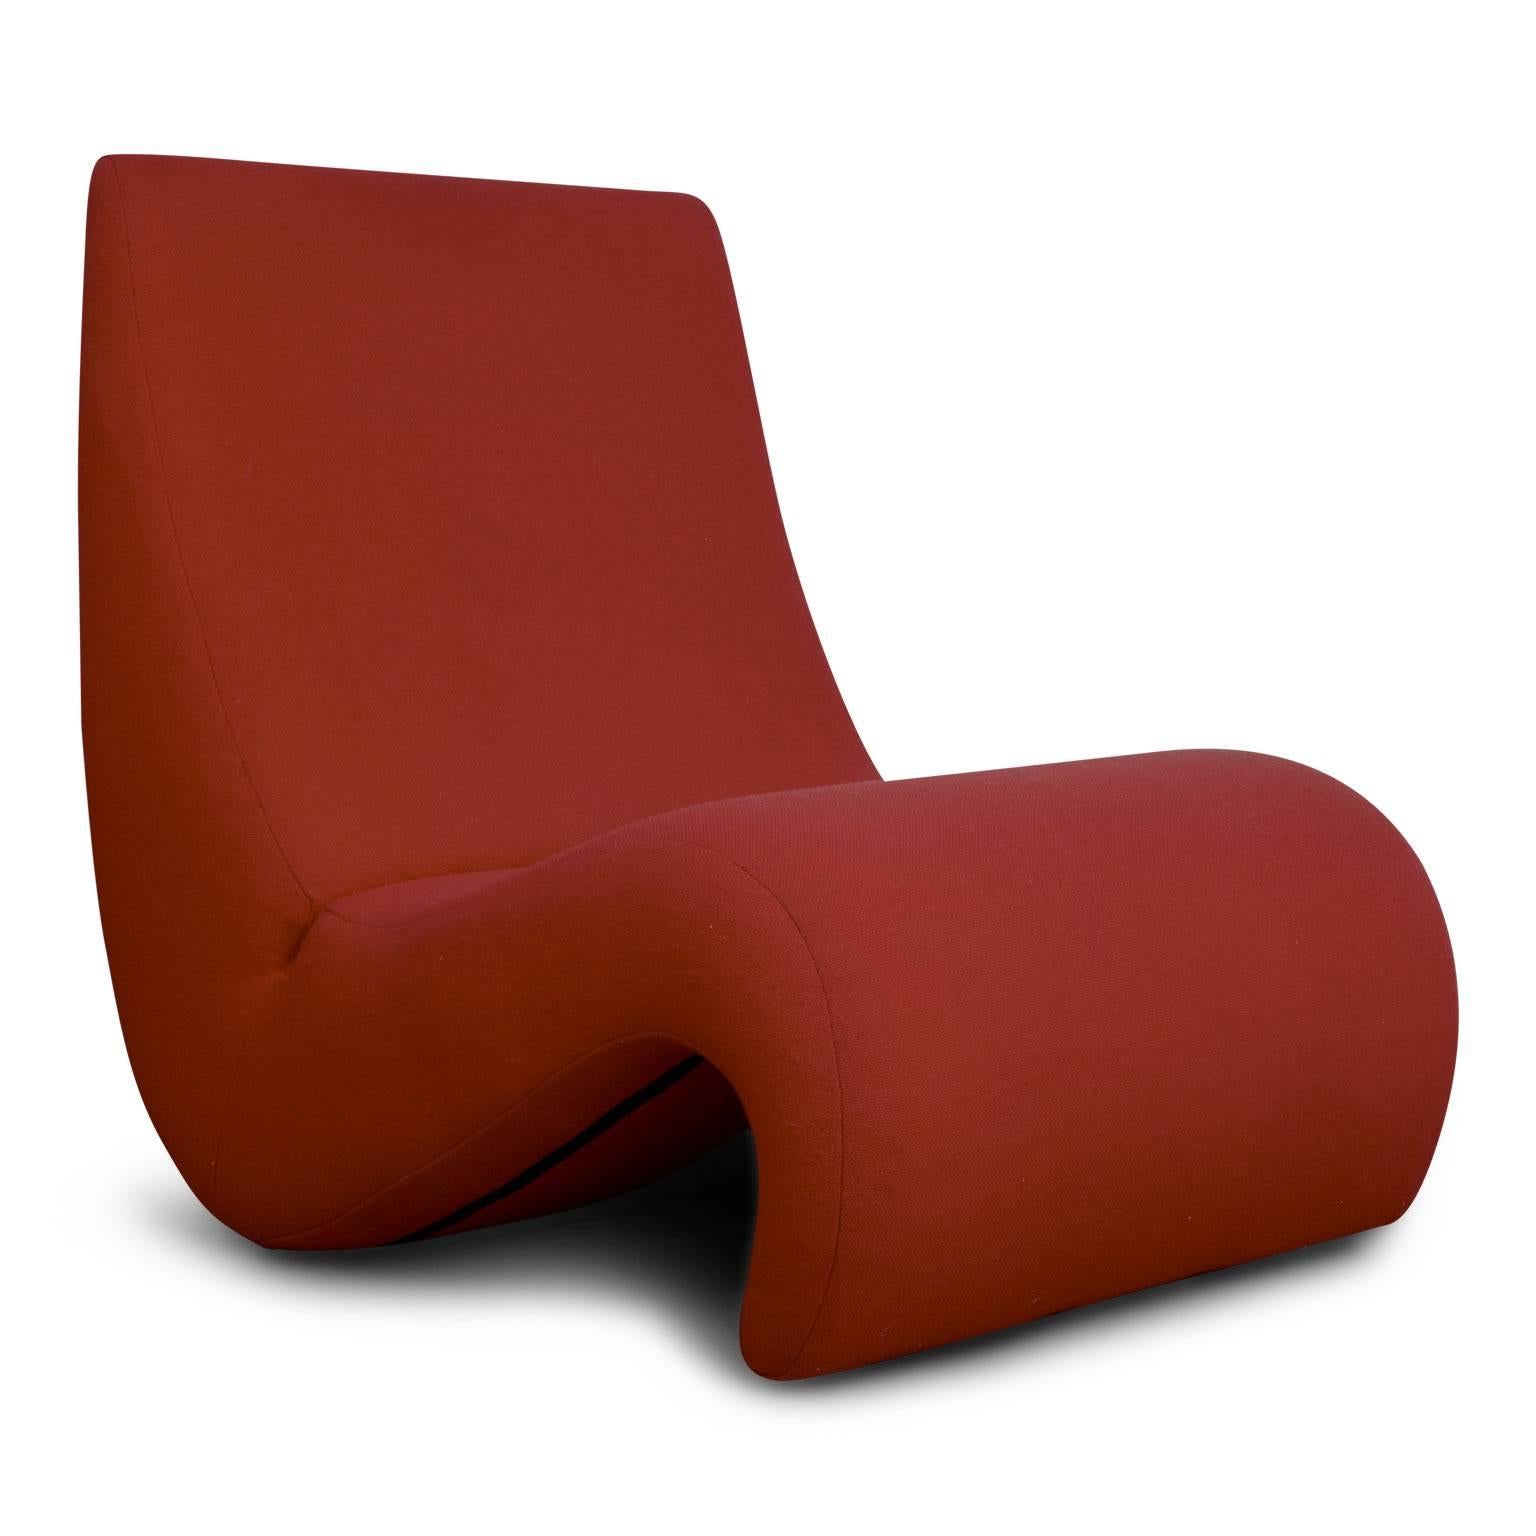 Originally designed by Verner Panton in 1970 for his Visiona installation, several versions of this Amoebe lounge chair were included in the display. This piece exemplifies the vivacious and spirited essence of the early 1970s with its s-shape